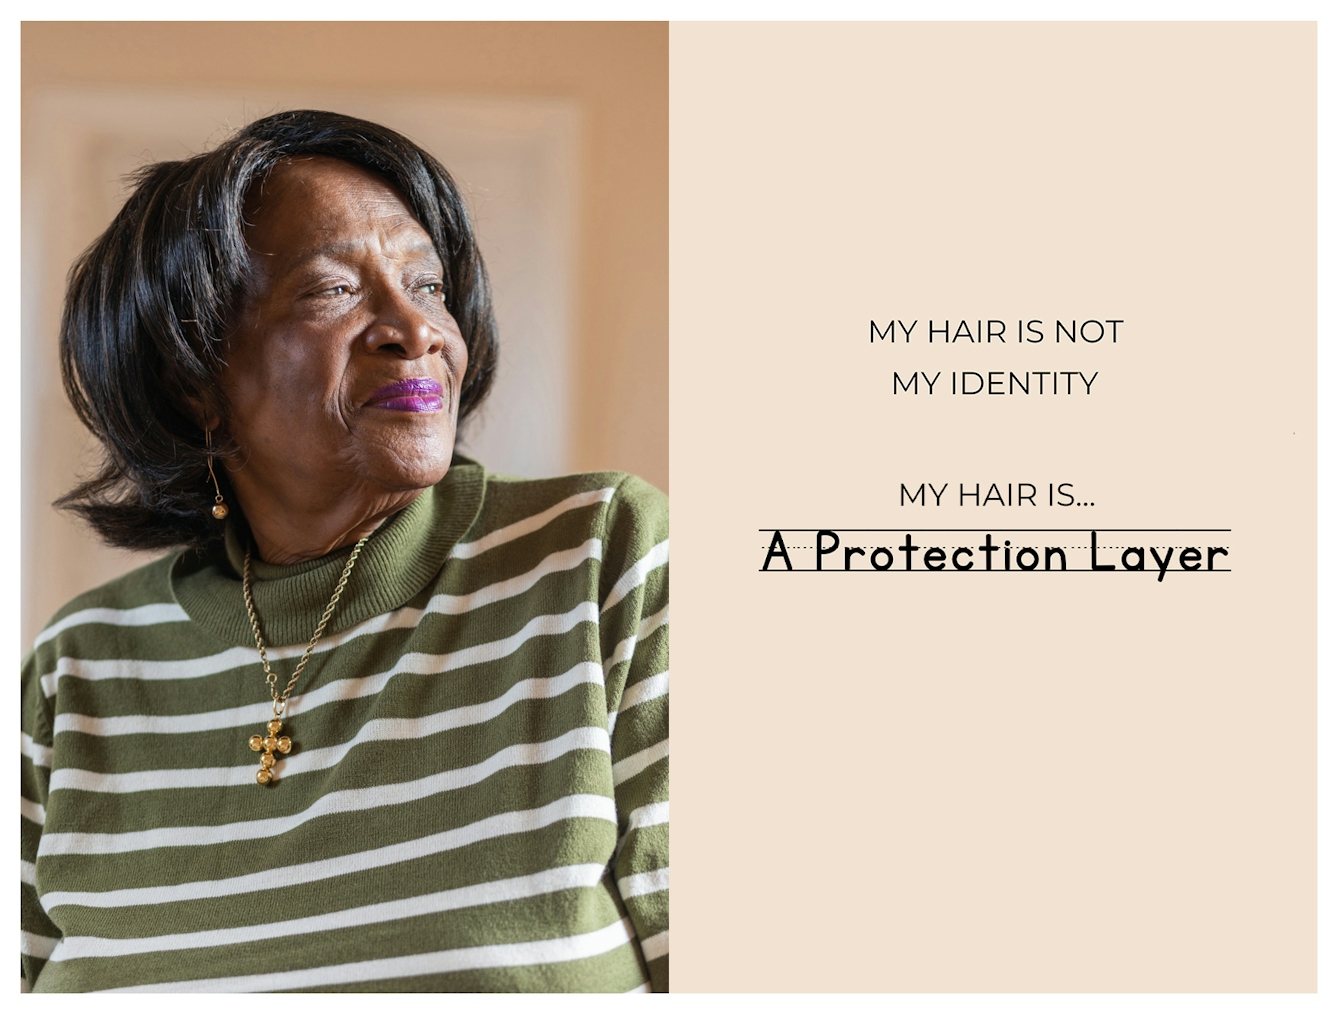 Photographic portrait and graphic design laid out next to each other. On the left is a portrait of an older Black woman from the waist up. She has straight hair in a short cut and is looking off to camera right, bathed in window light, with a warm smiling expression. The graphic to the right has a beige background on which are the words 'My hair is not my identity. My hair is...A Protection Layer'. These last three words are each in a different font to emphasise their meaning.